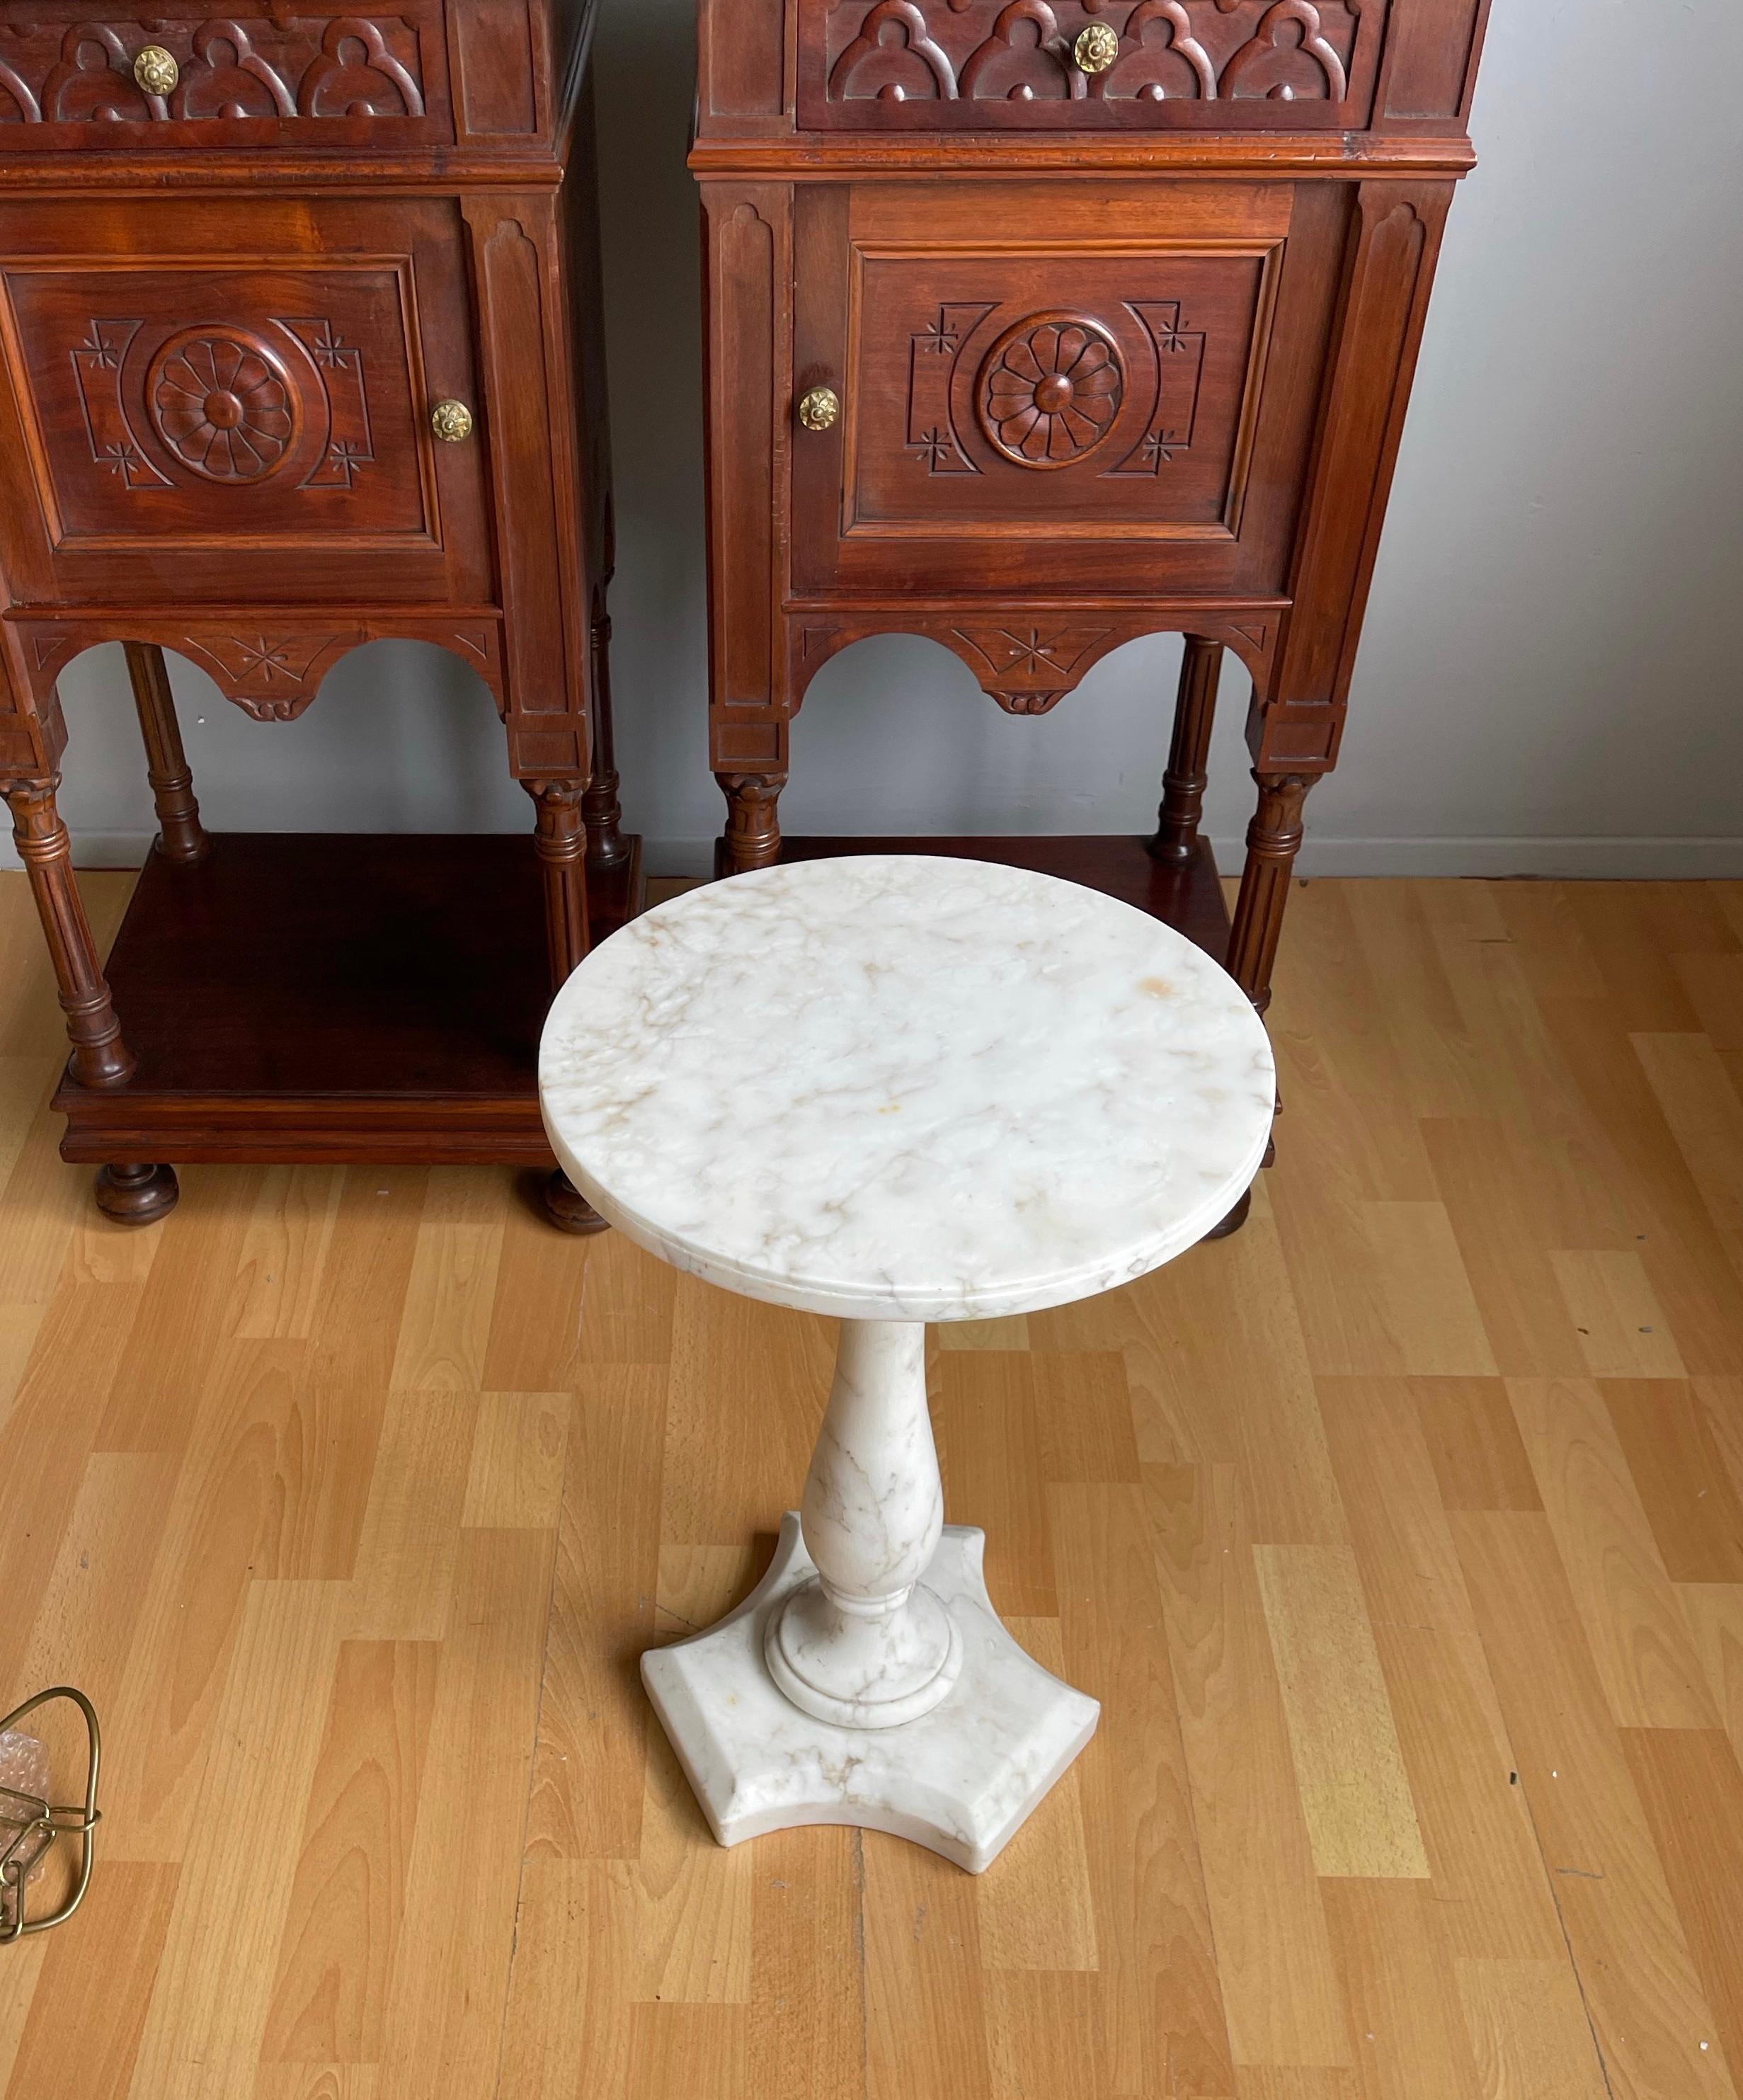 Italian Design Midcentury Modern White Carrara Marble Pedestal Stand / End Table In Good Condition For Sale In Lisse, NL